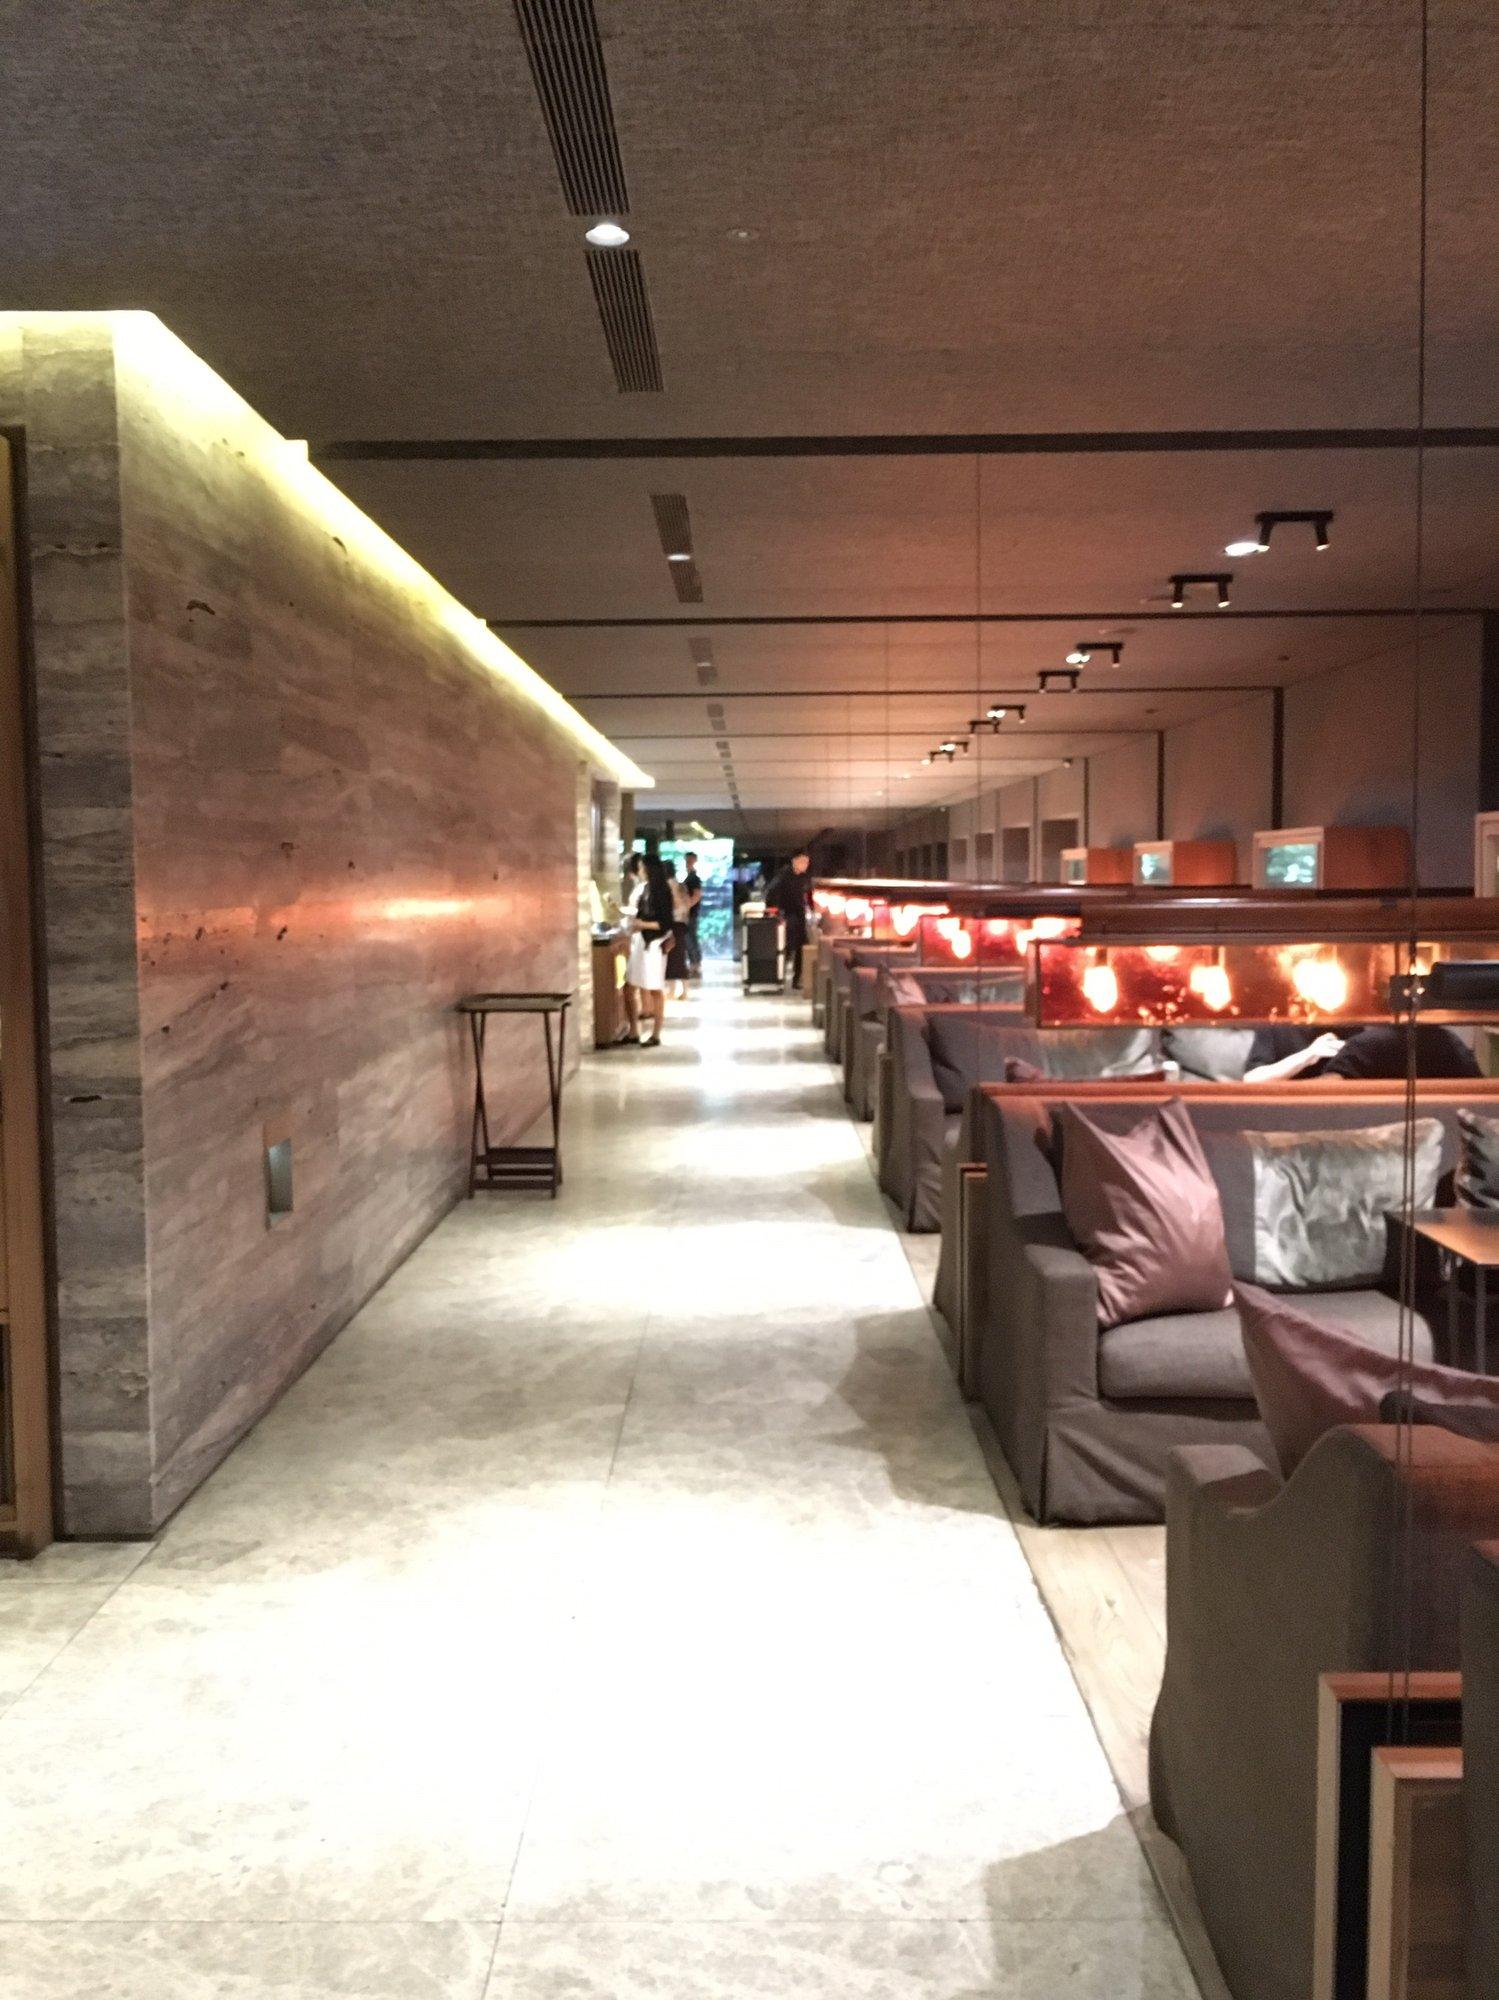 China Airlines Lounge (V1) image 20 of 44